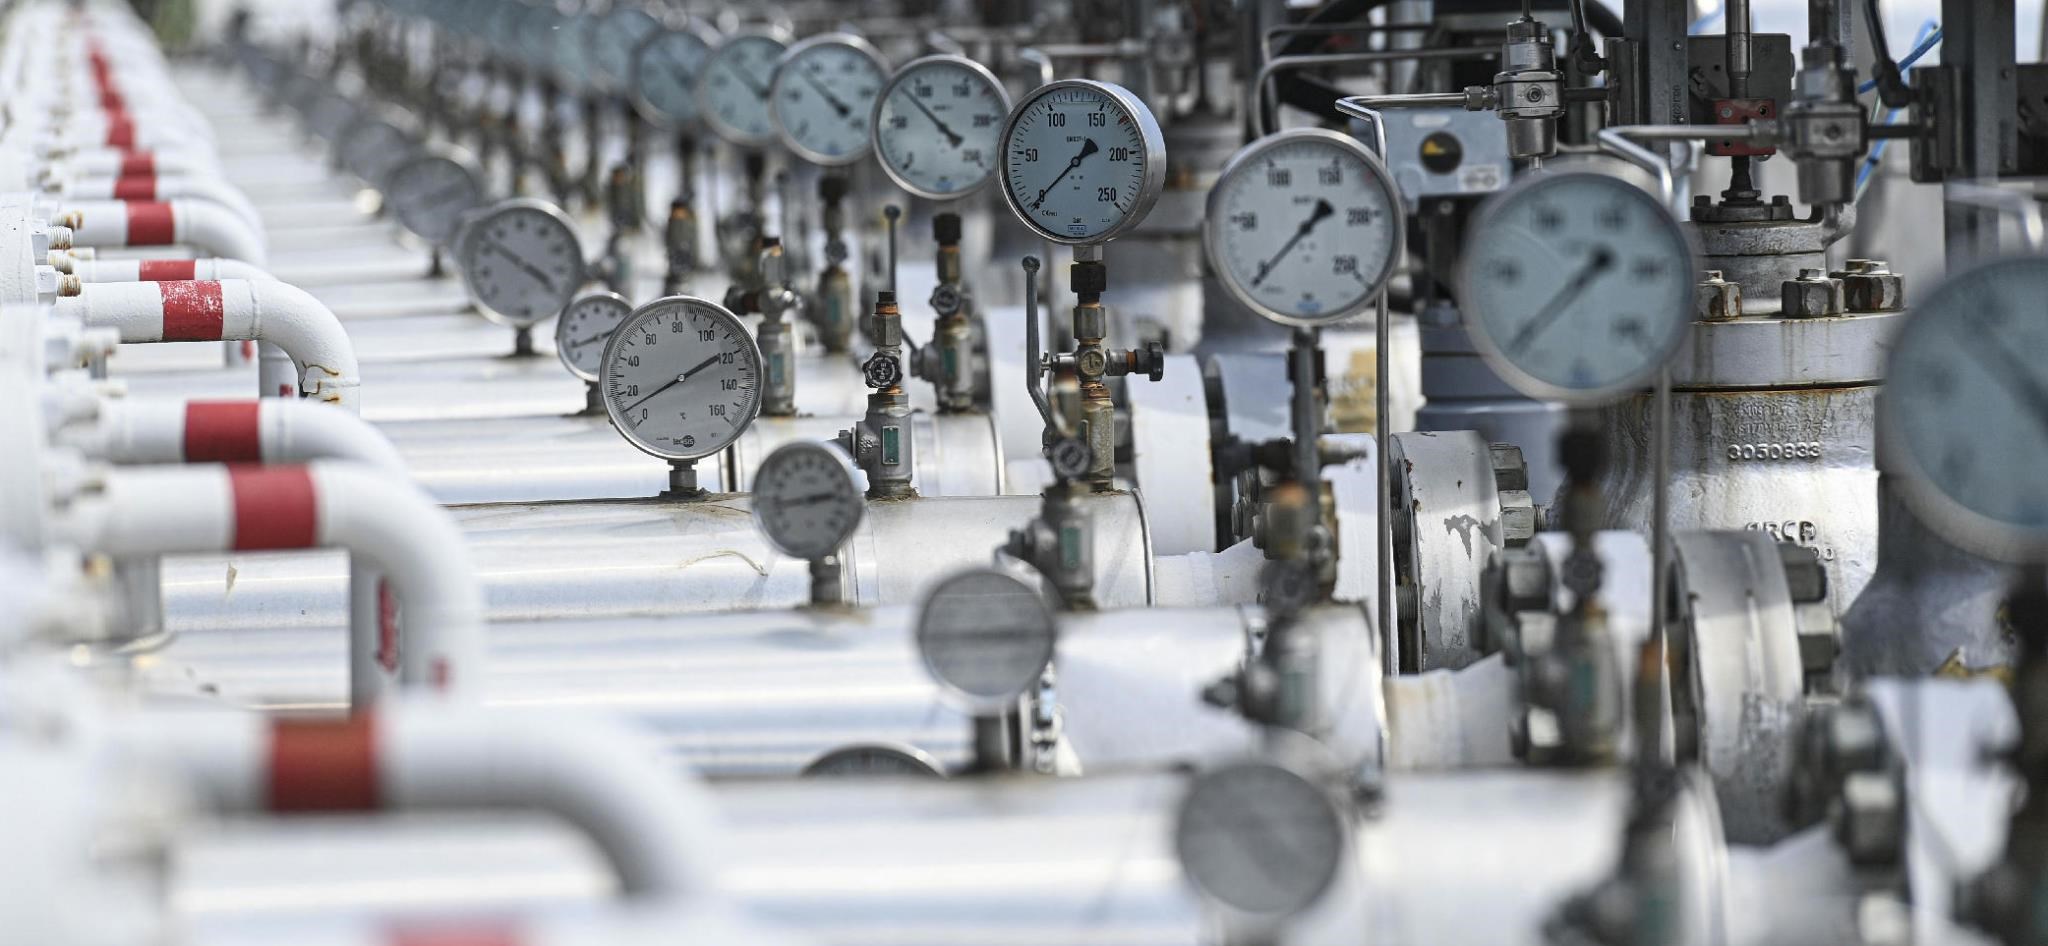 Economy: Hungary is buying more Russian gas, but a new way may have to be found